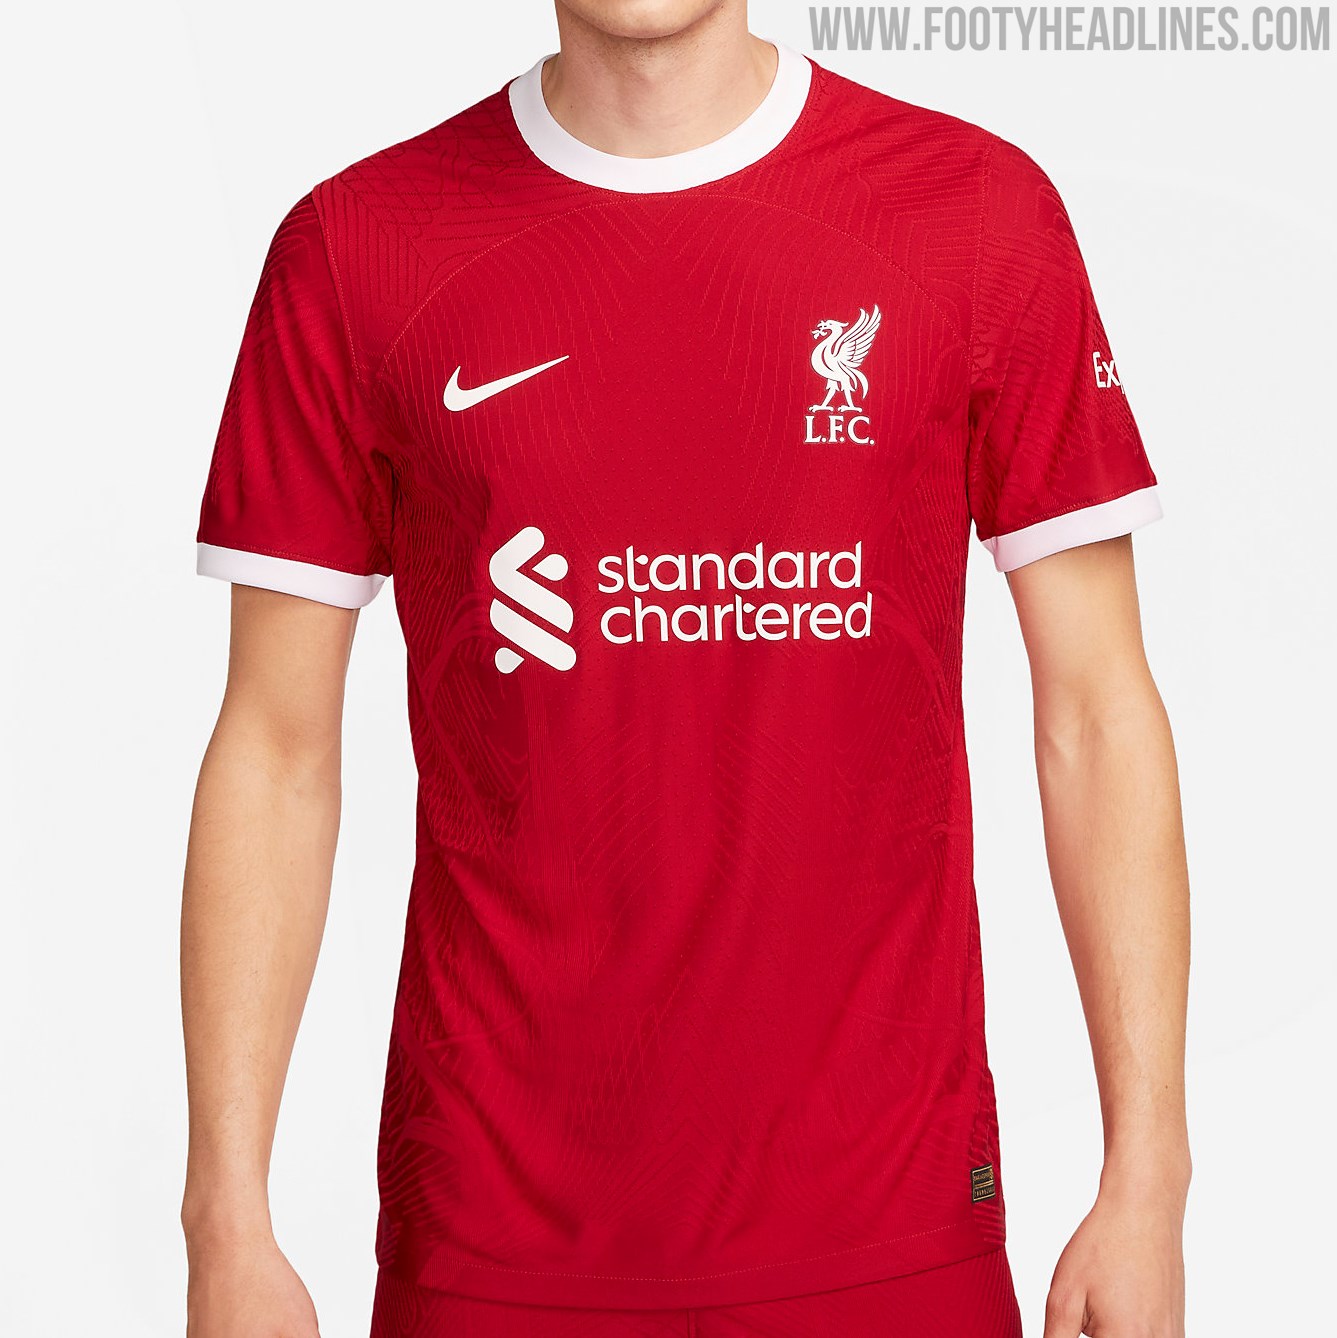 Liverpool 23-24 Home Kit Released - On-Pitch Debut + New Green Keeper ...